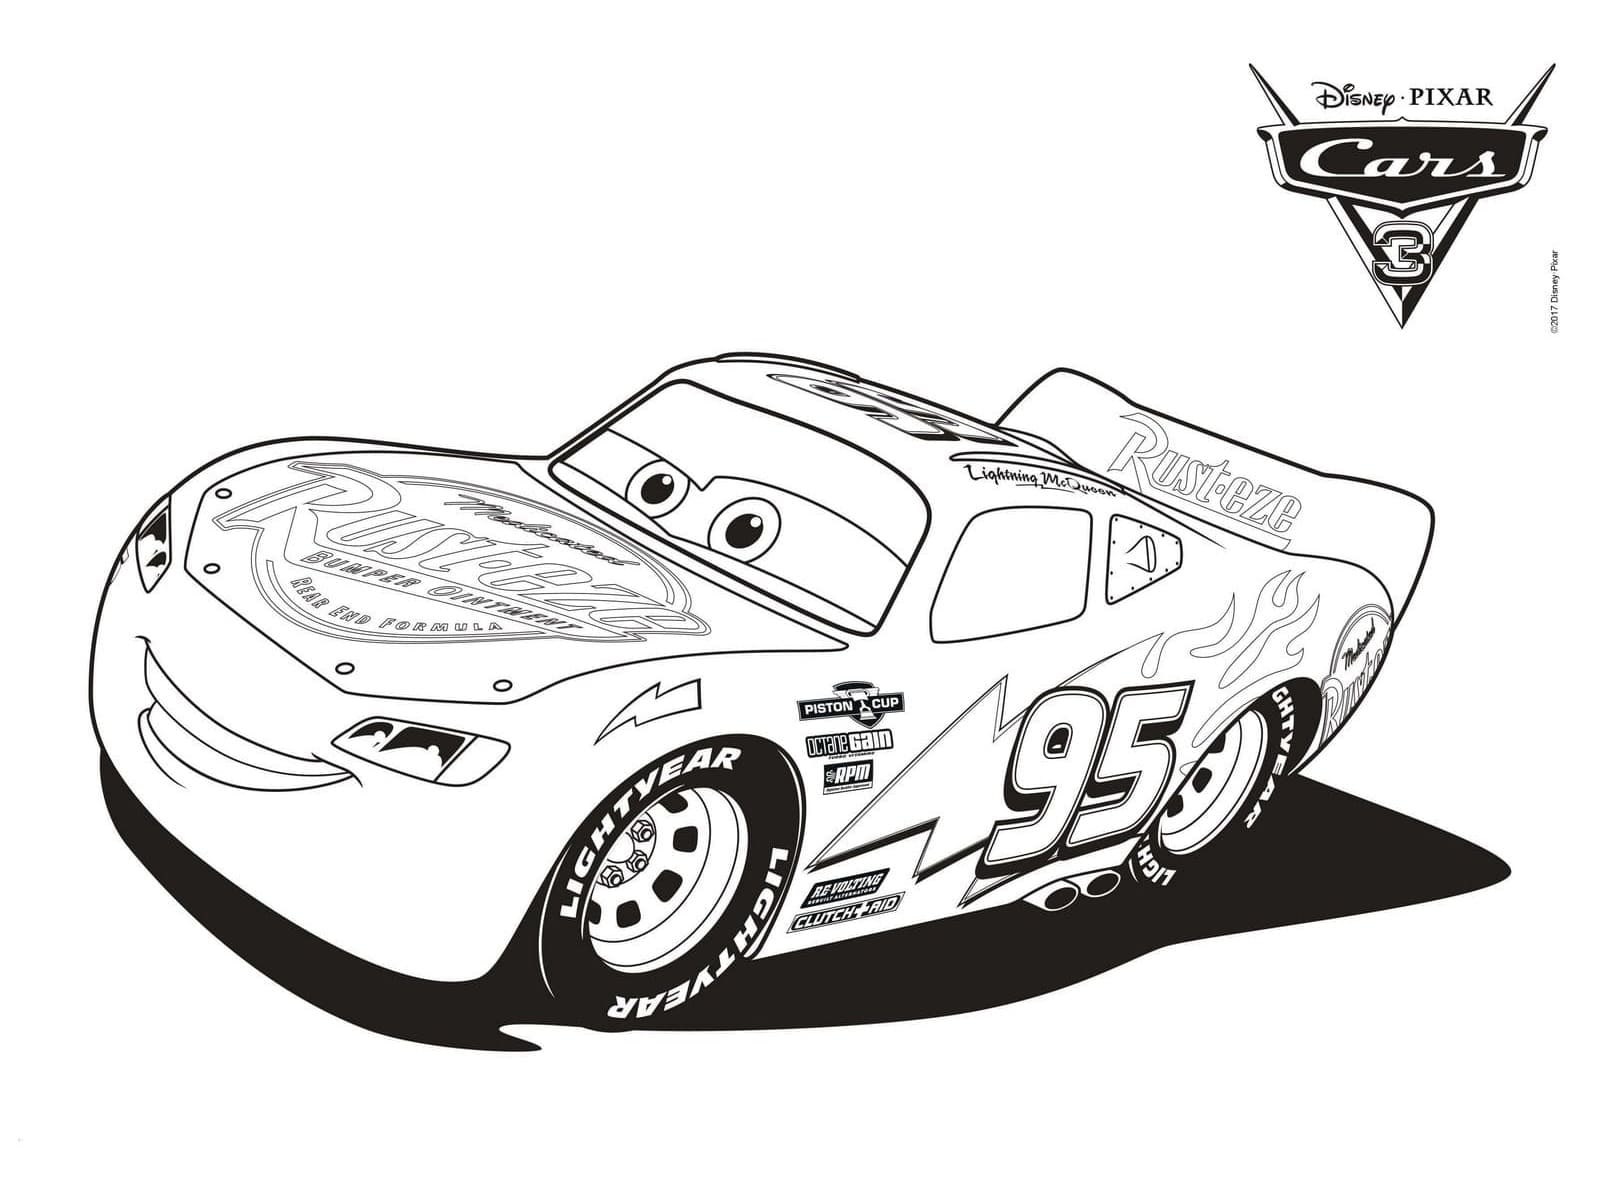 Lightning Mcqueen coloring pages - Free coloring pages